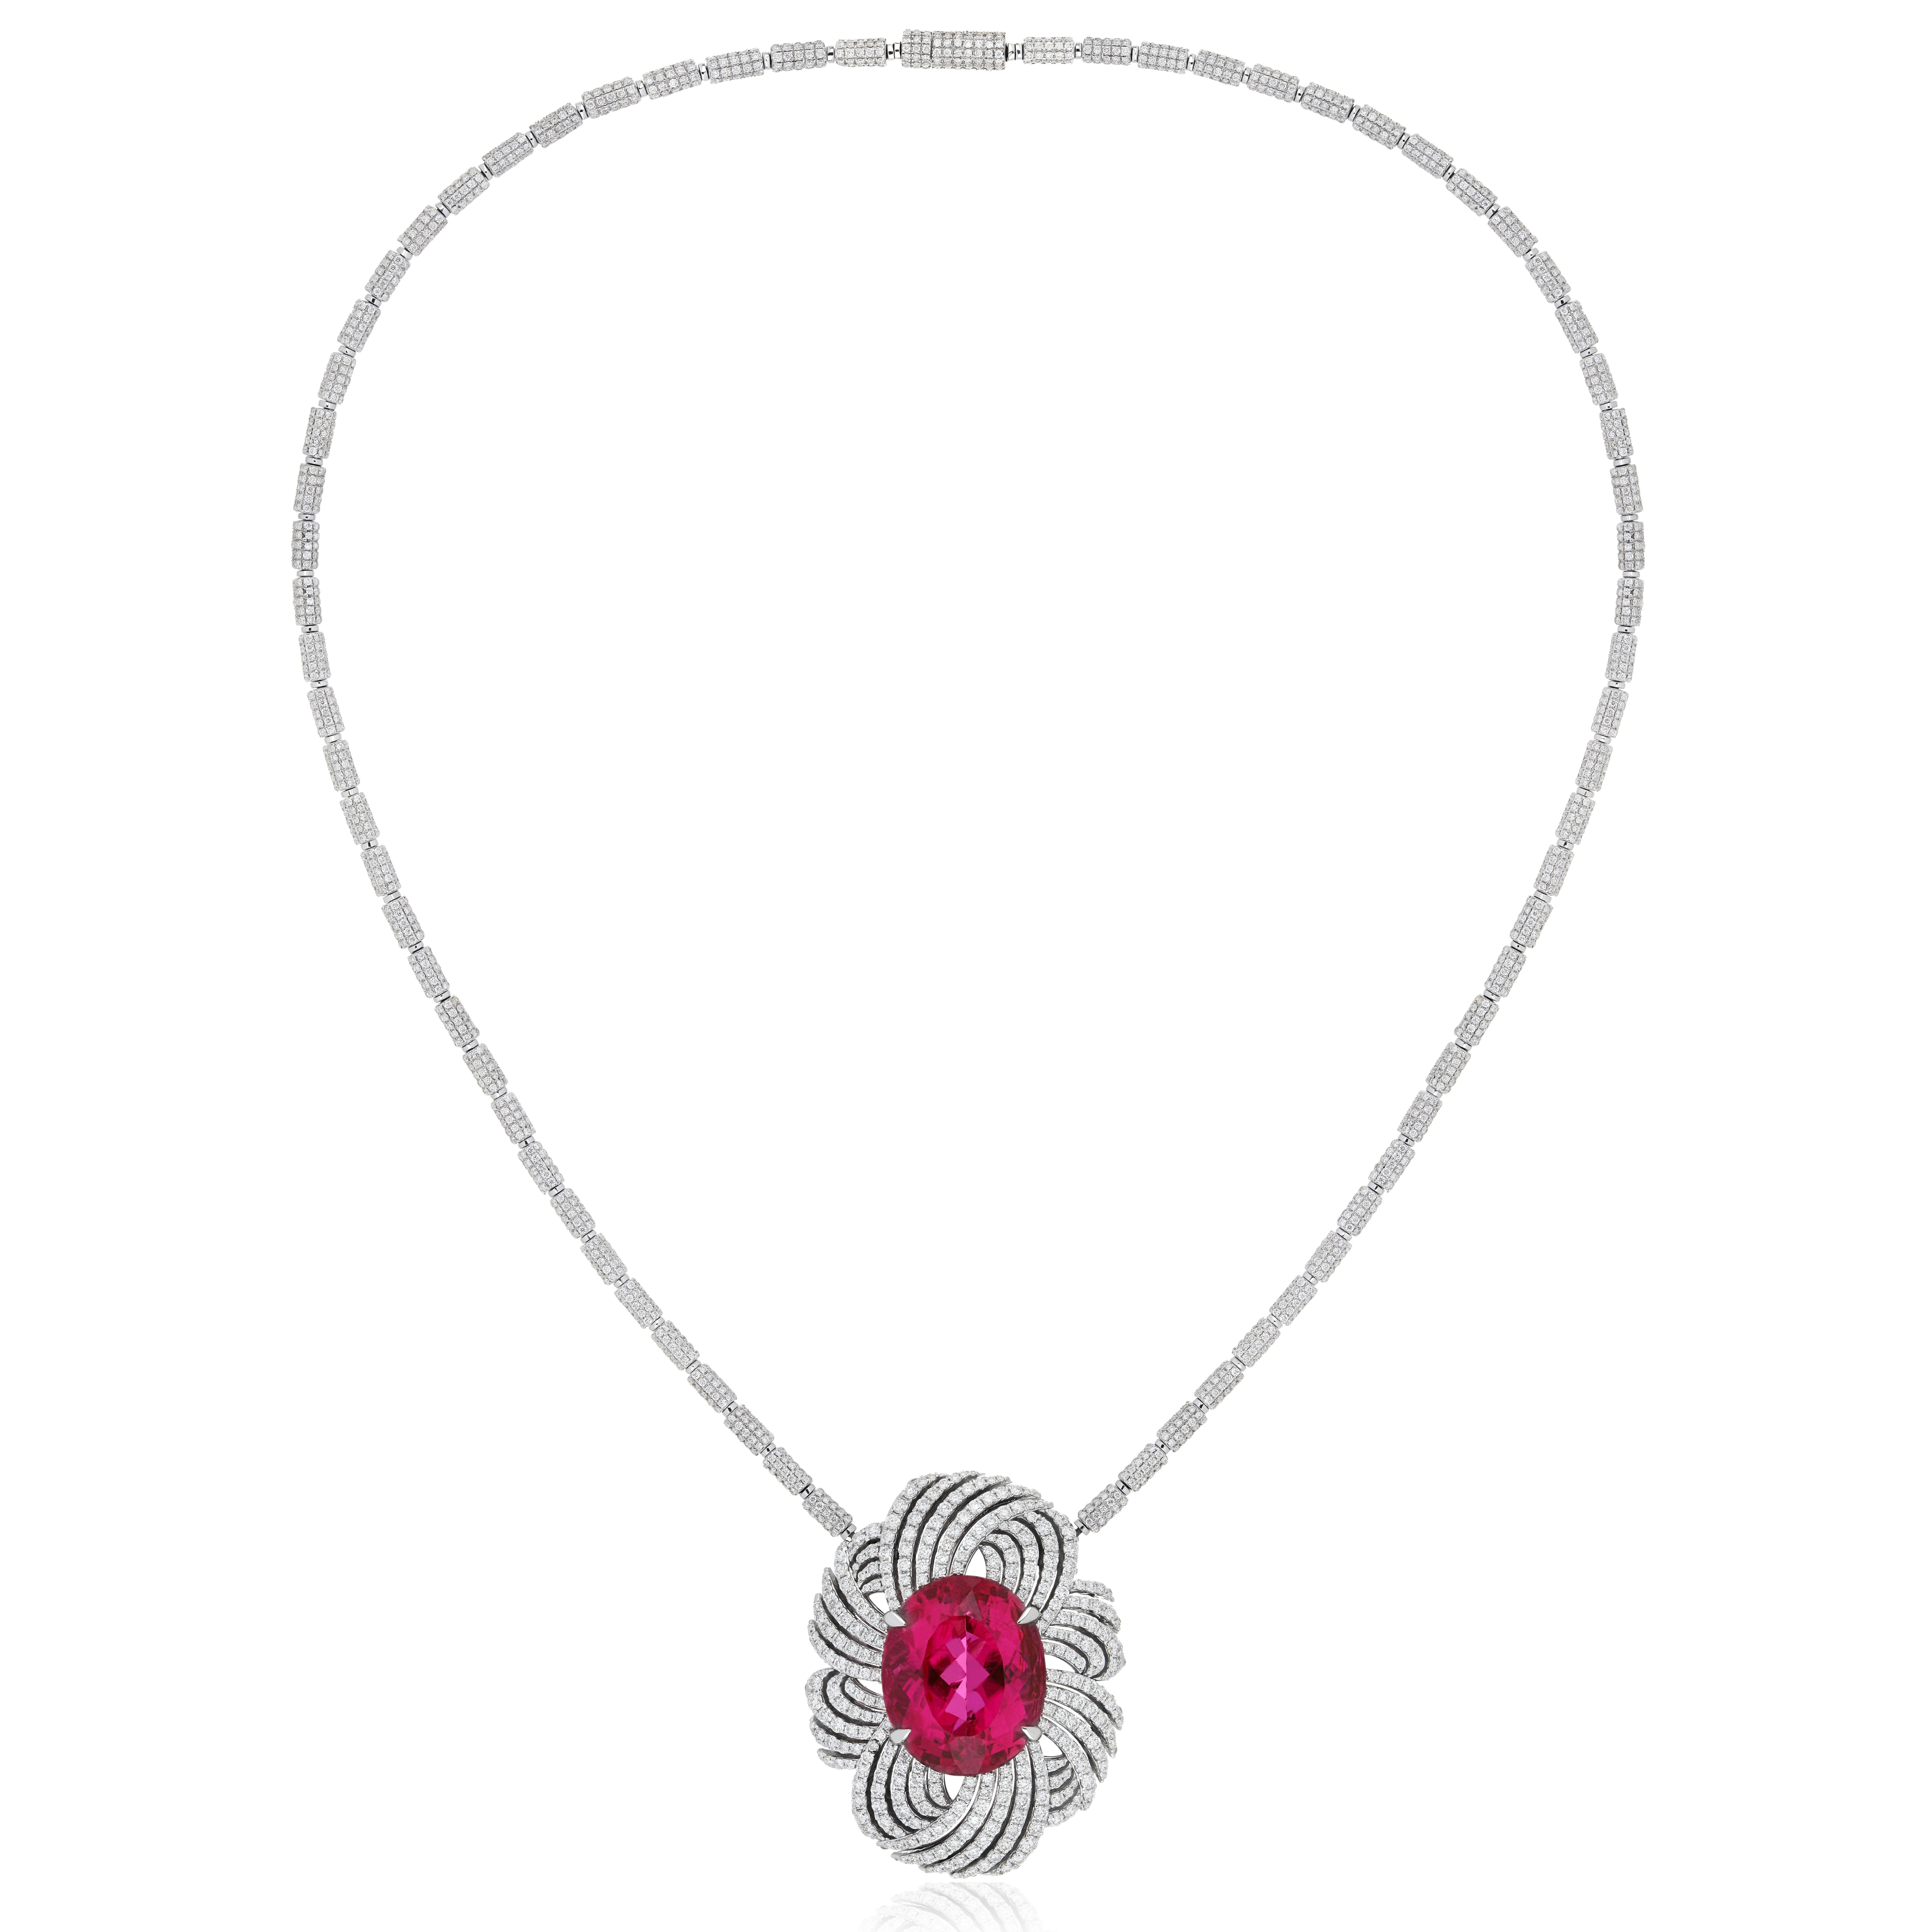 Elegant and exquisitely detailed 18K White Gold Necklace, with 22.3 Cts Oval Shape Rubellite set in centre and Surrounded by meticulously set Micro pave Diamonds, weighing approx. 14.0 CT's. total carat weight to further enhance the beauty of the